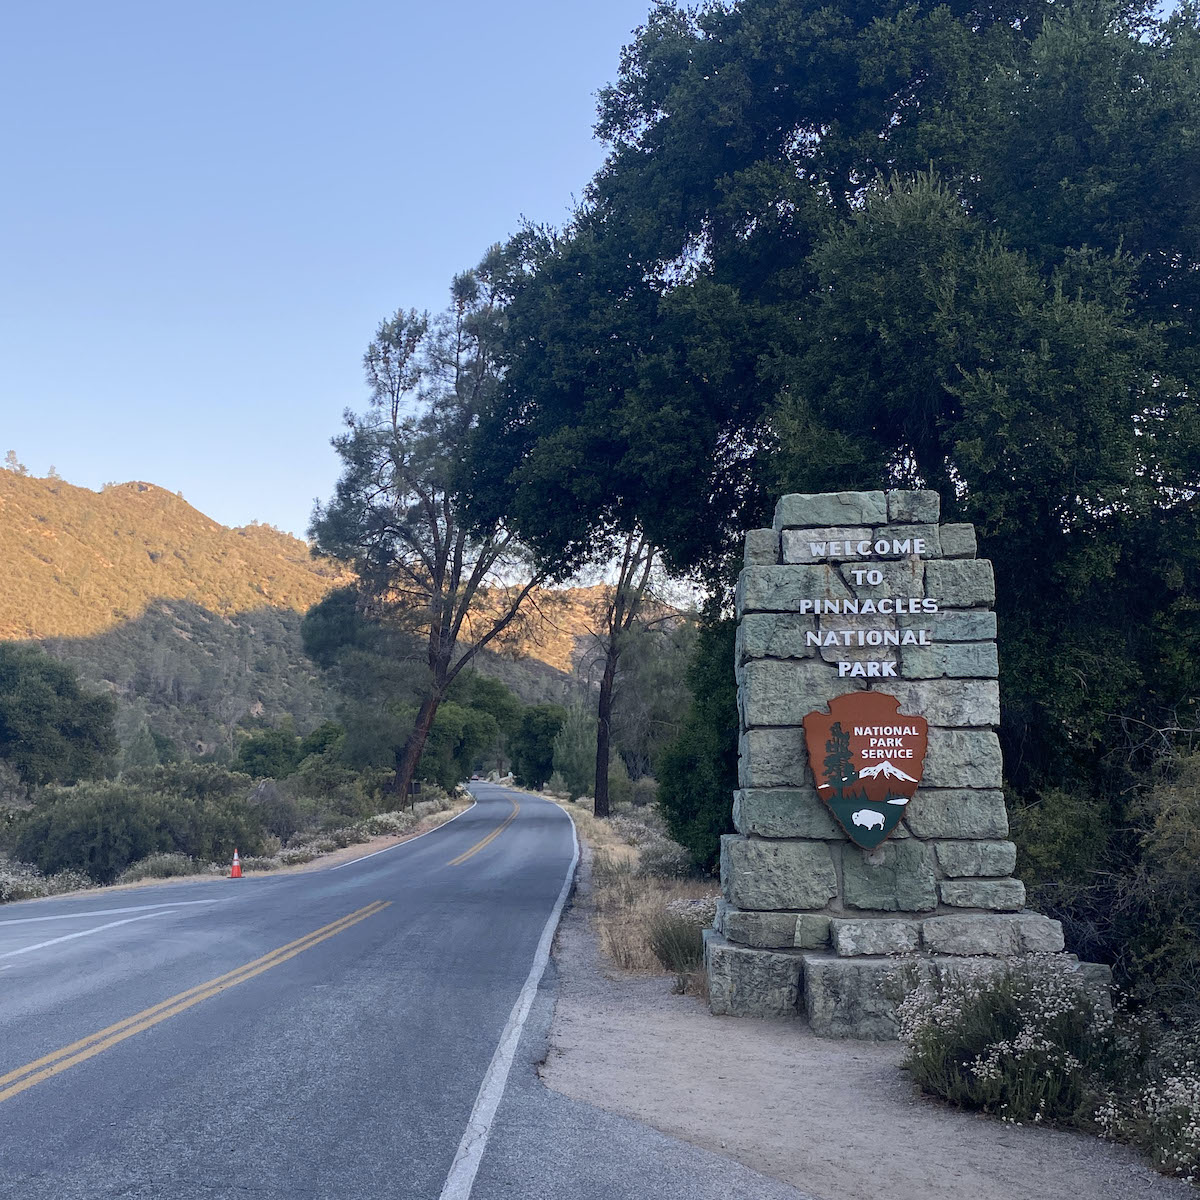 One of the entrance signs in Pinnacles National Park